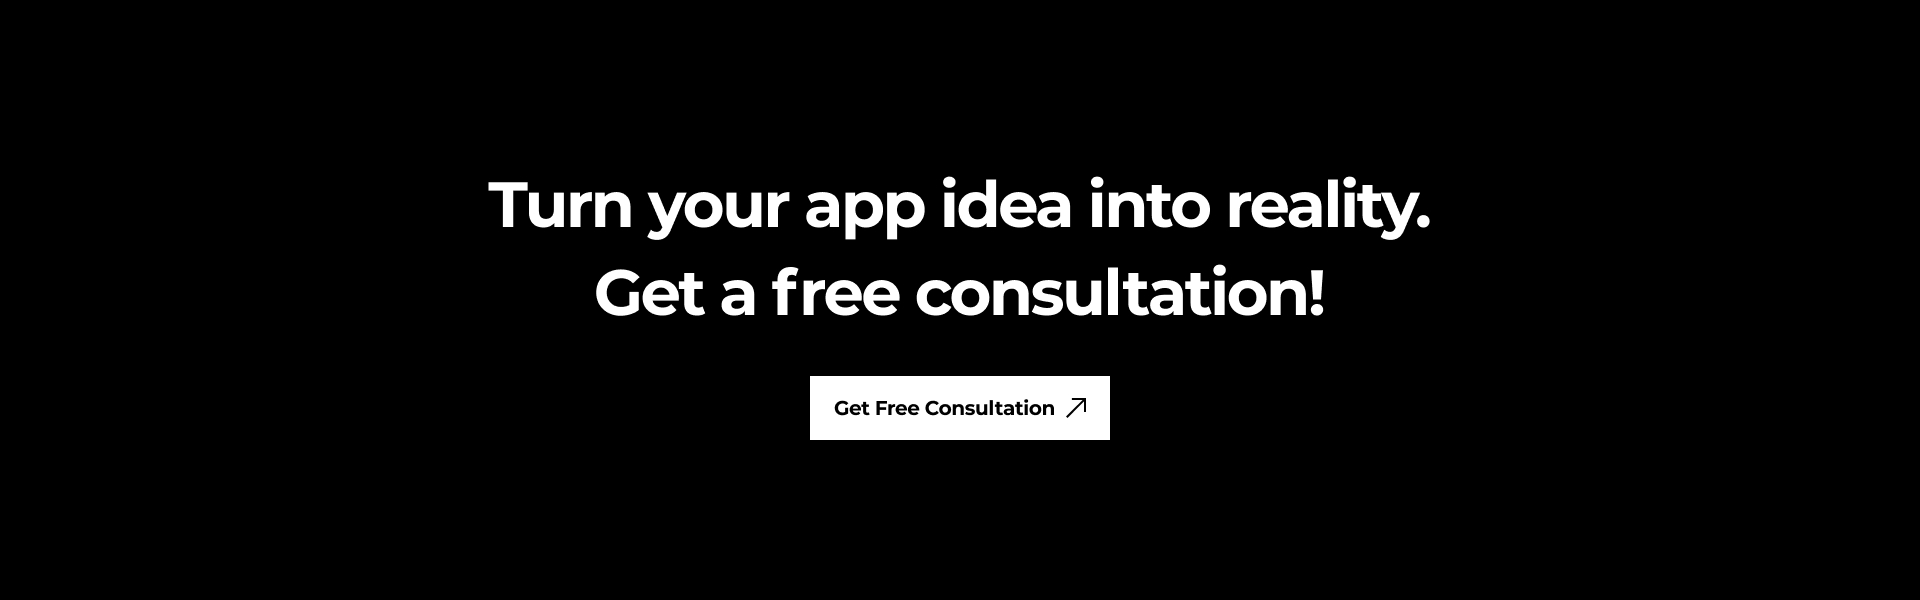 Turn your app idea into reality. Get a free consultation!
